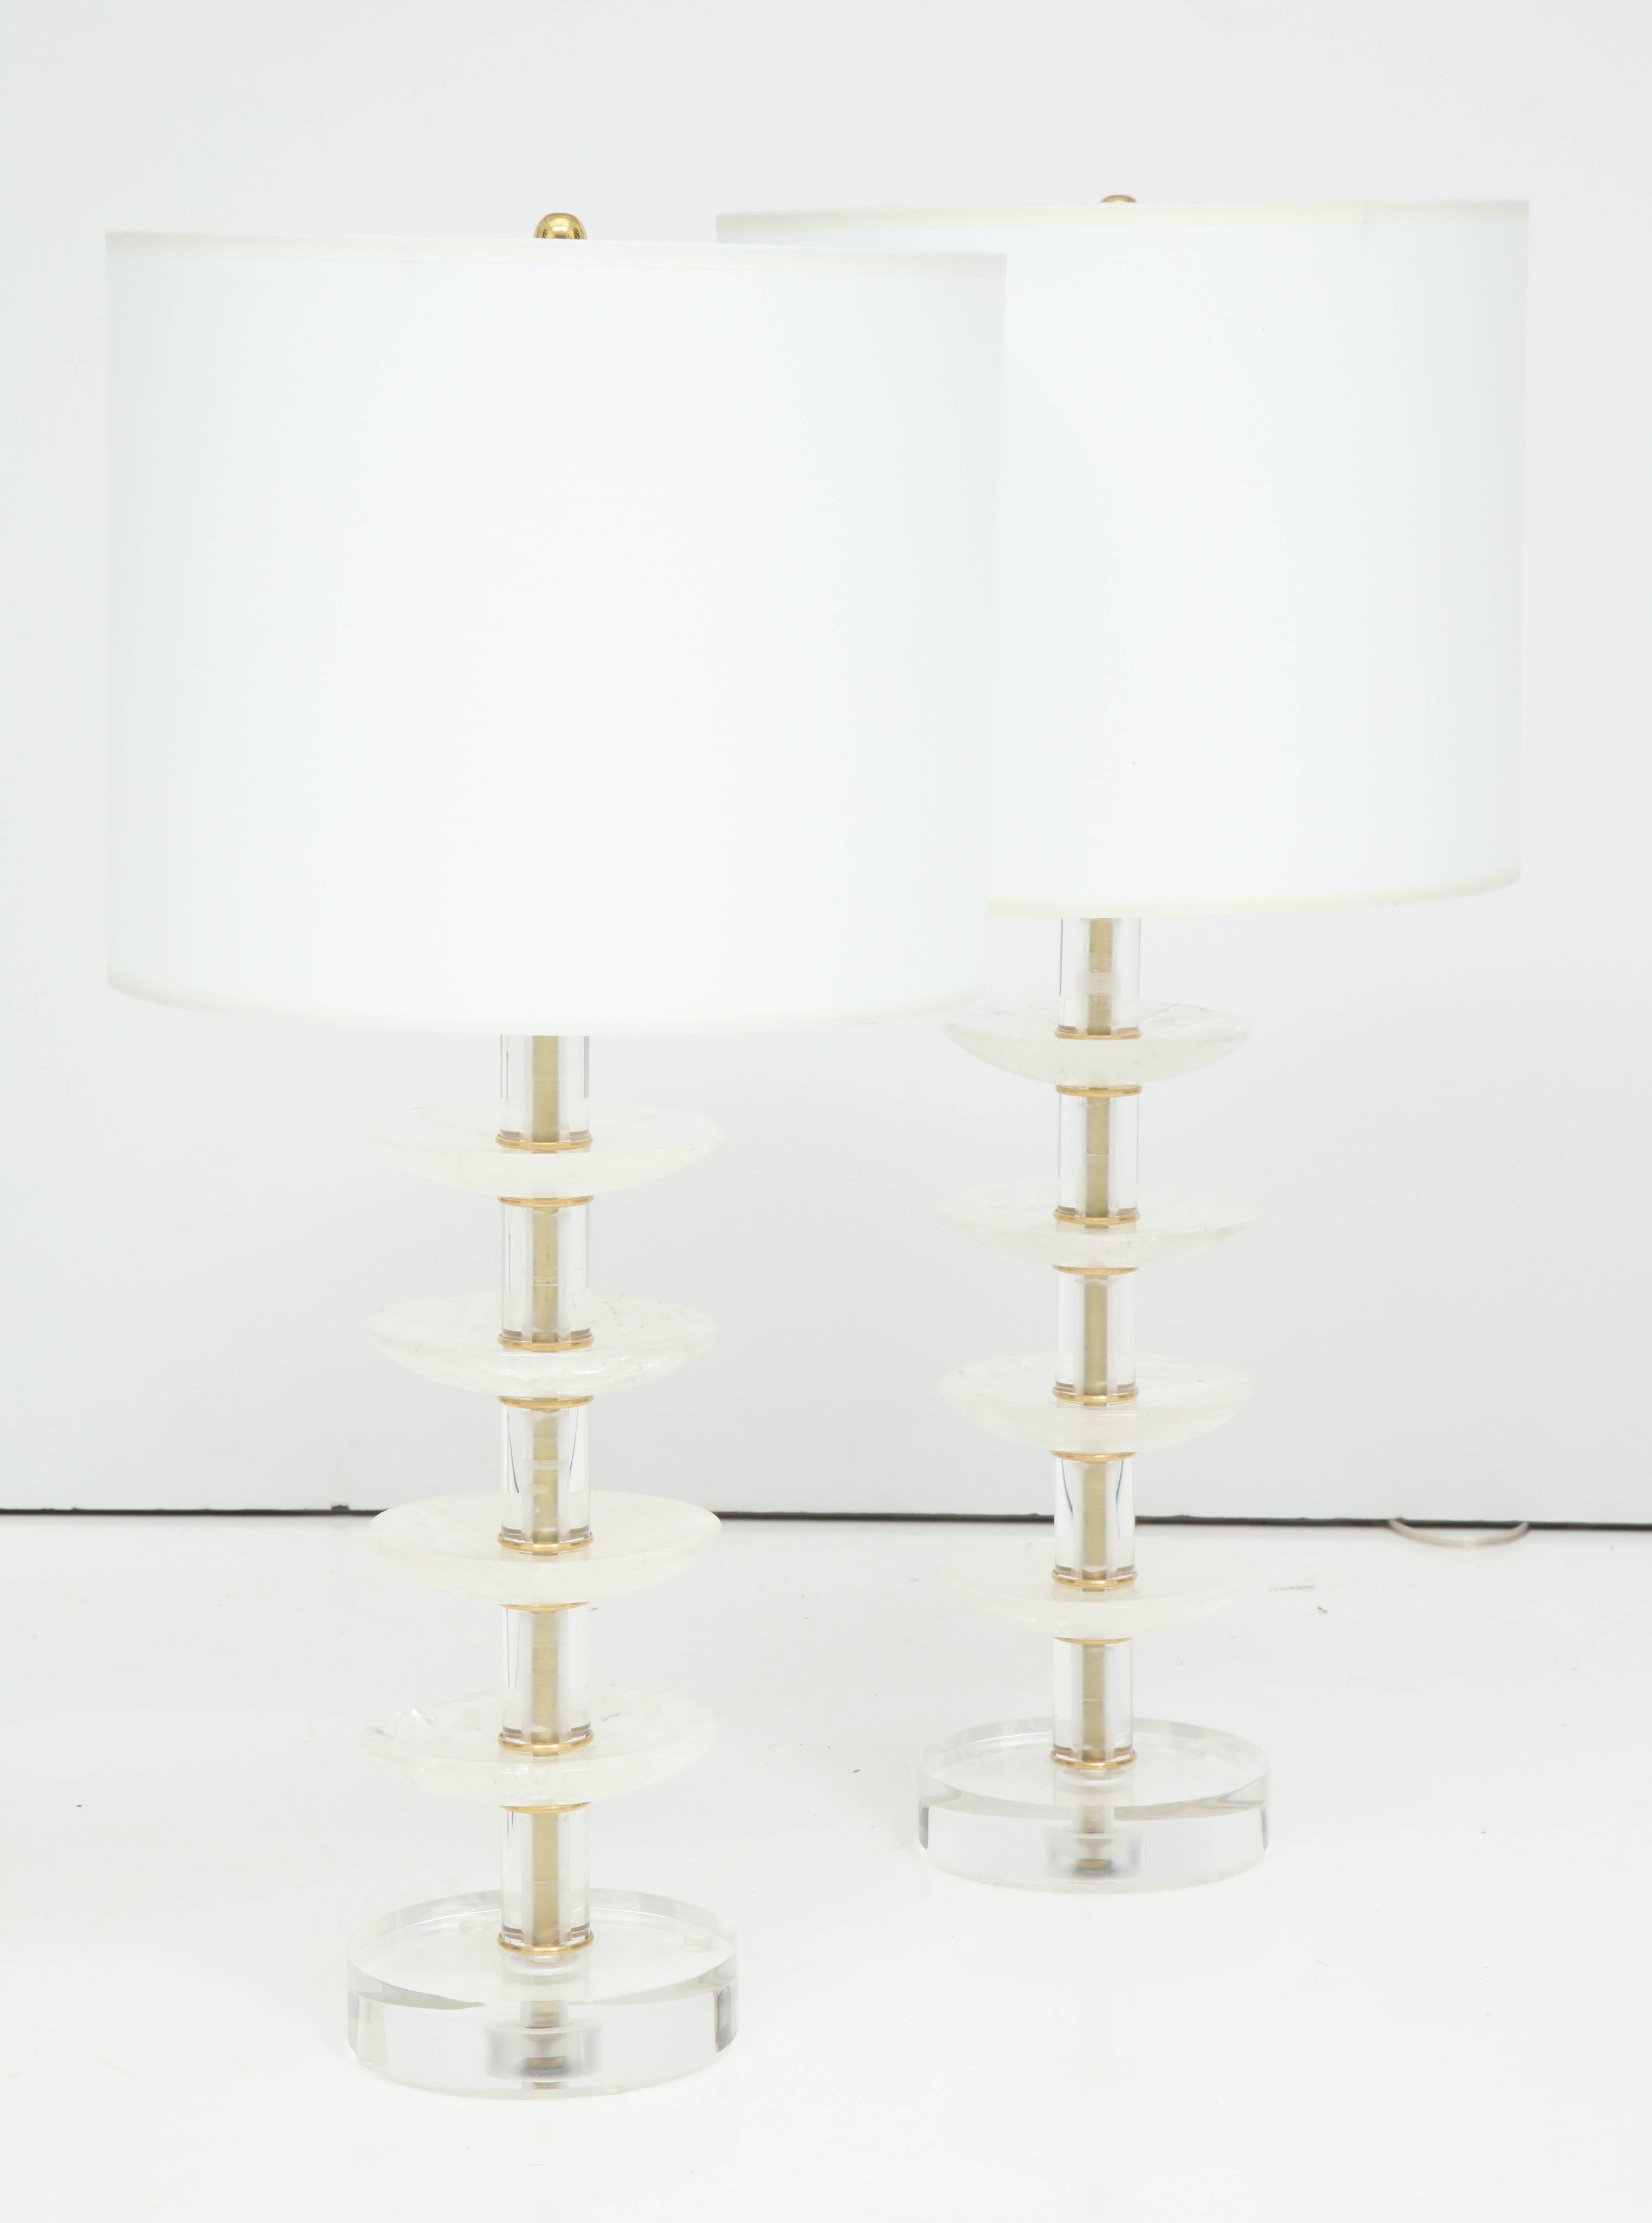 A unique and chic pair of lamps, made from rock crystal bobeches from a 19th century chandelier on a Lucite base.